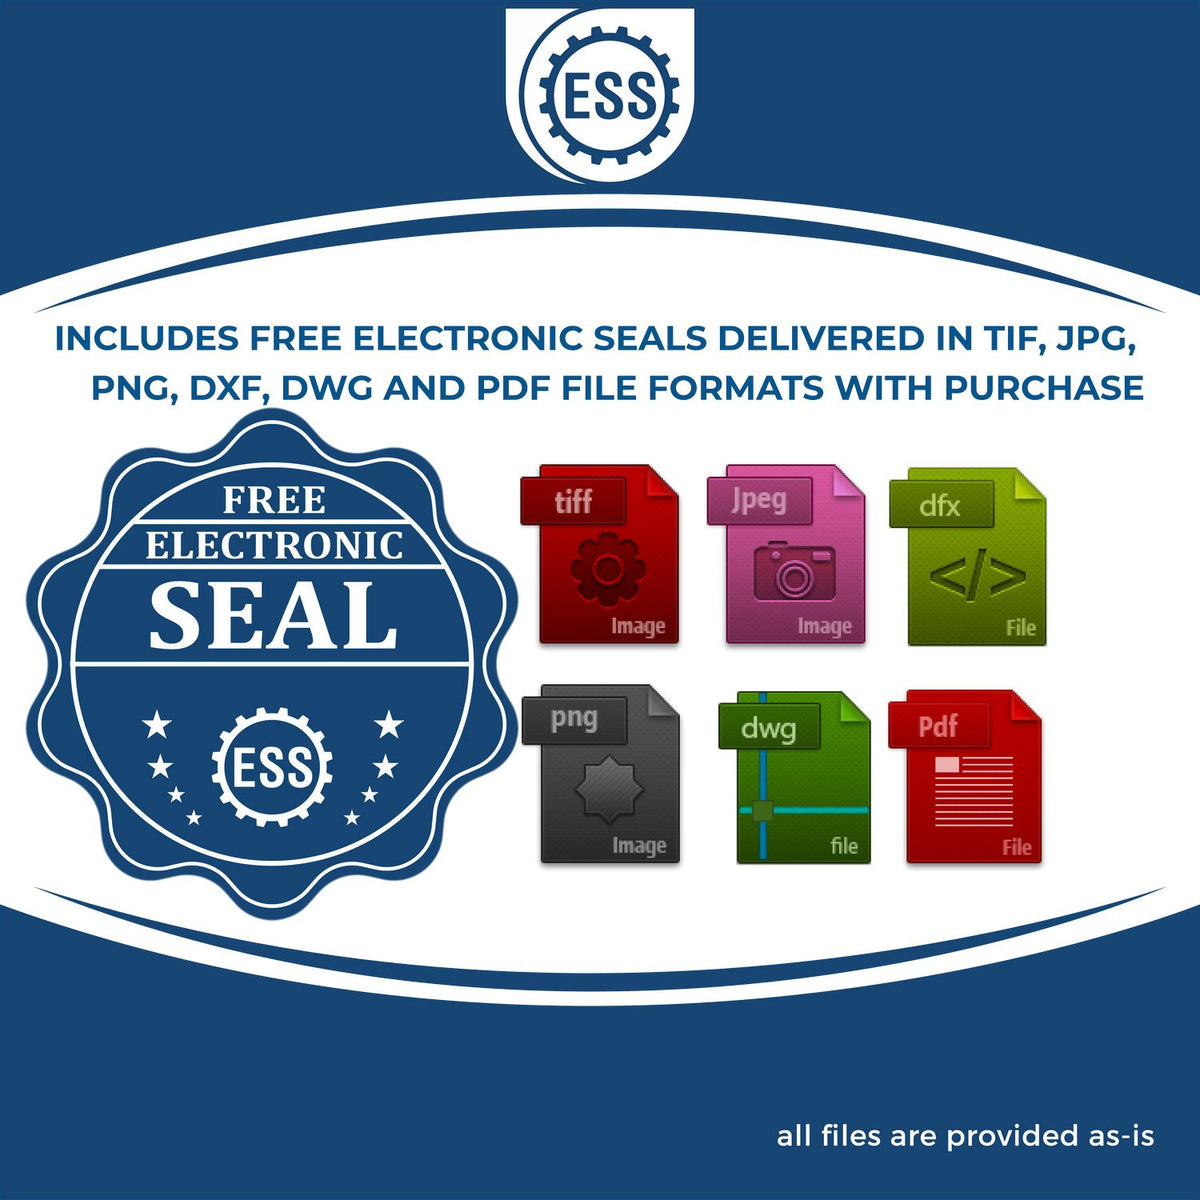 An infographic for the free electronic seal for the Long Reach Missouri Geology Seal illustrating the different file type icons such as DXF, DWG, TIF, JPG and PNG.